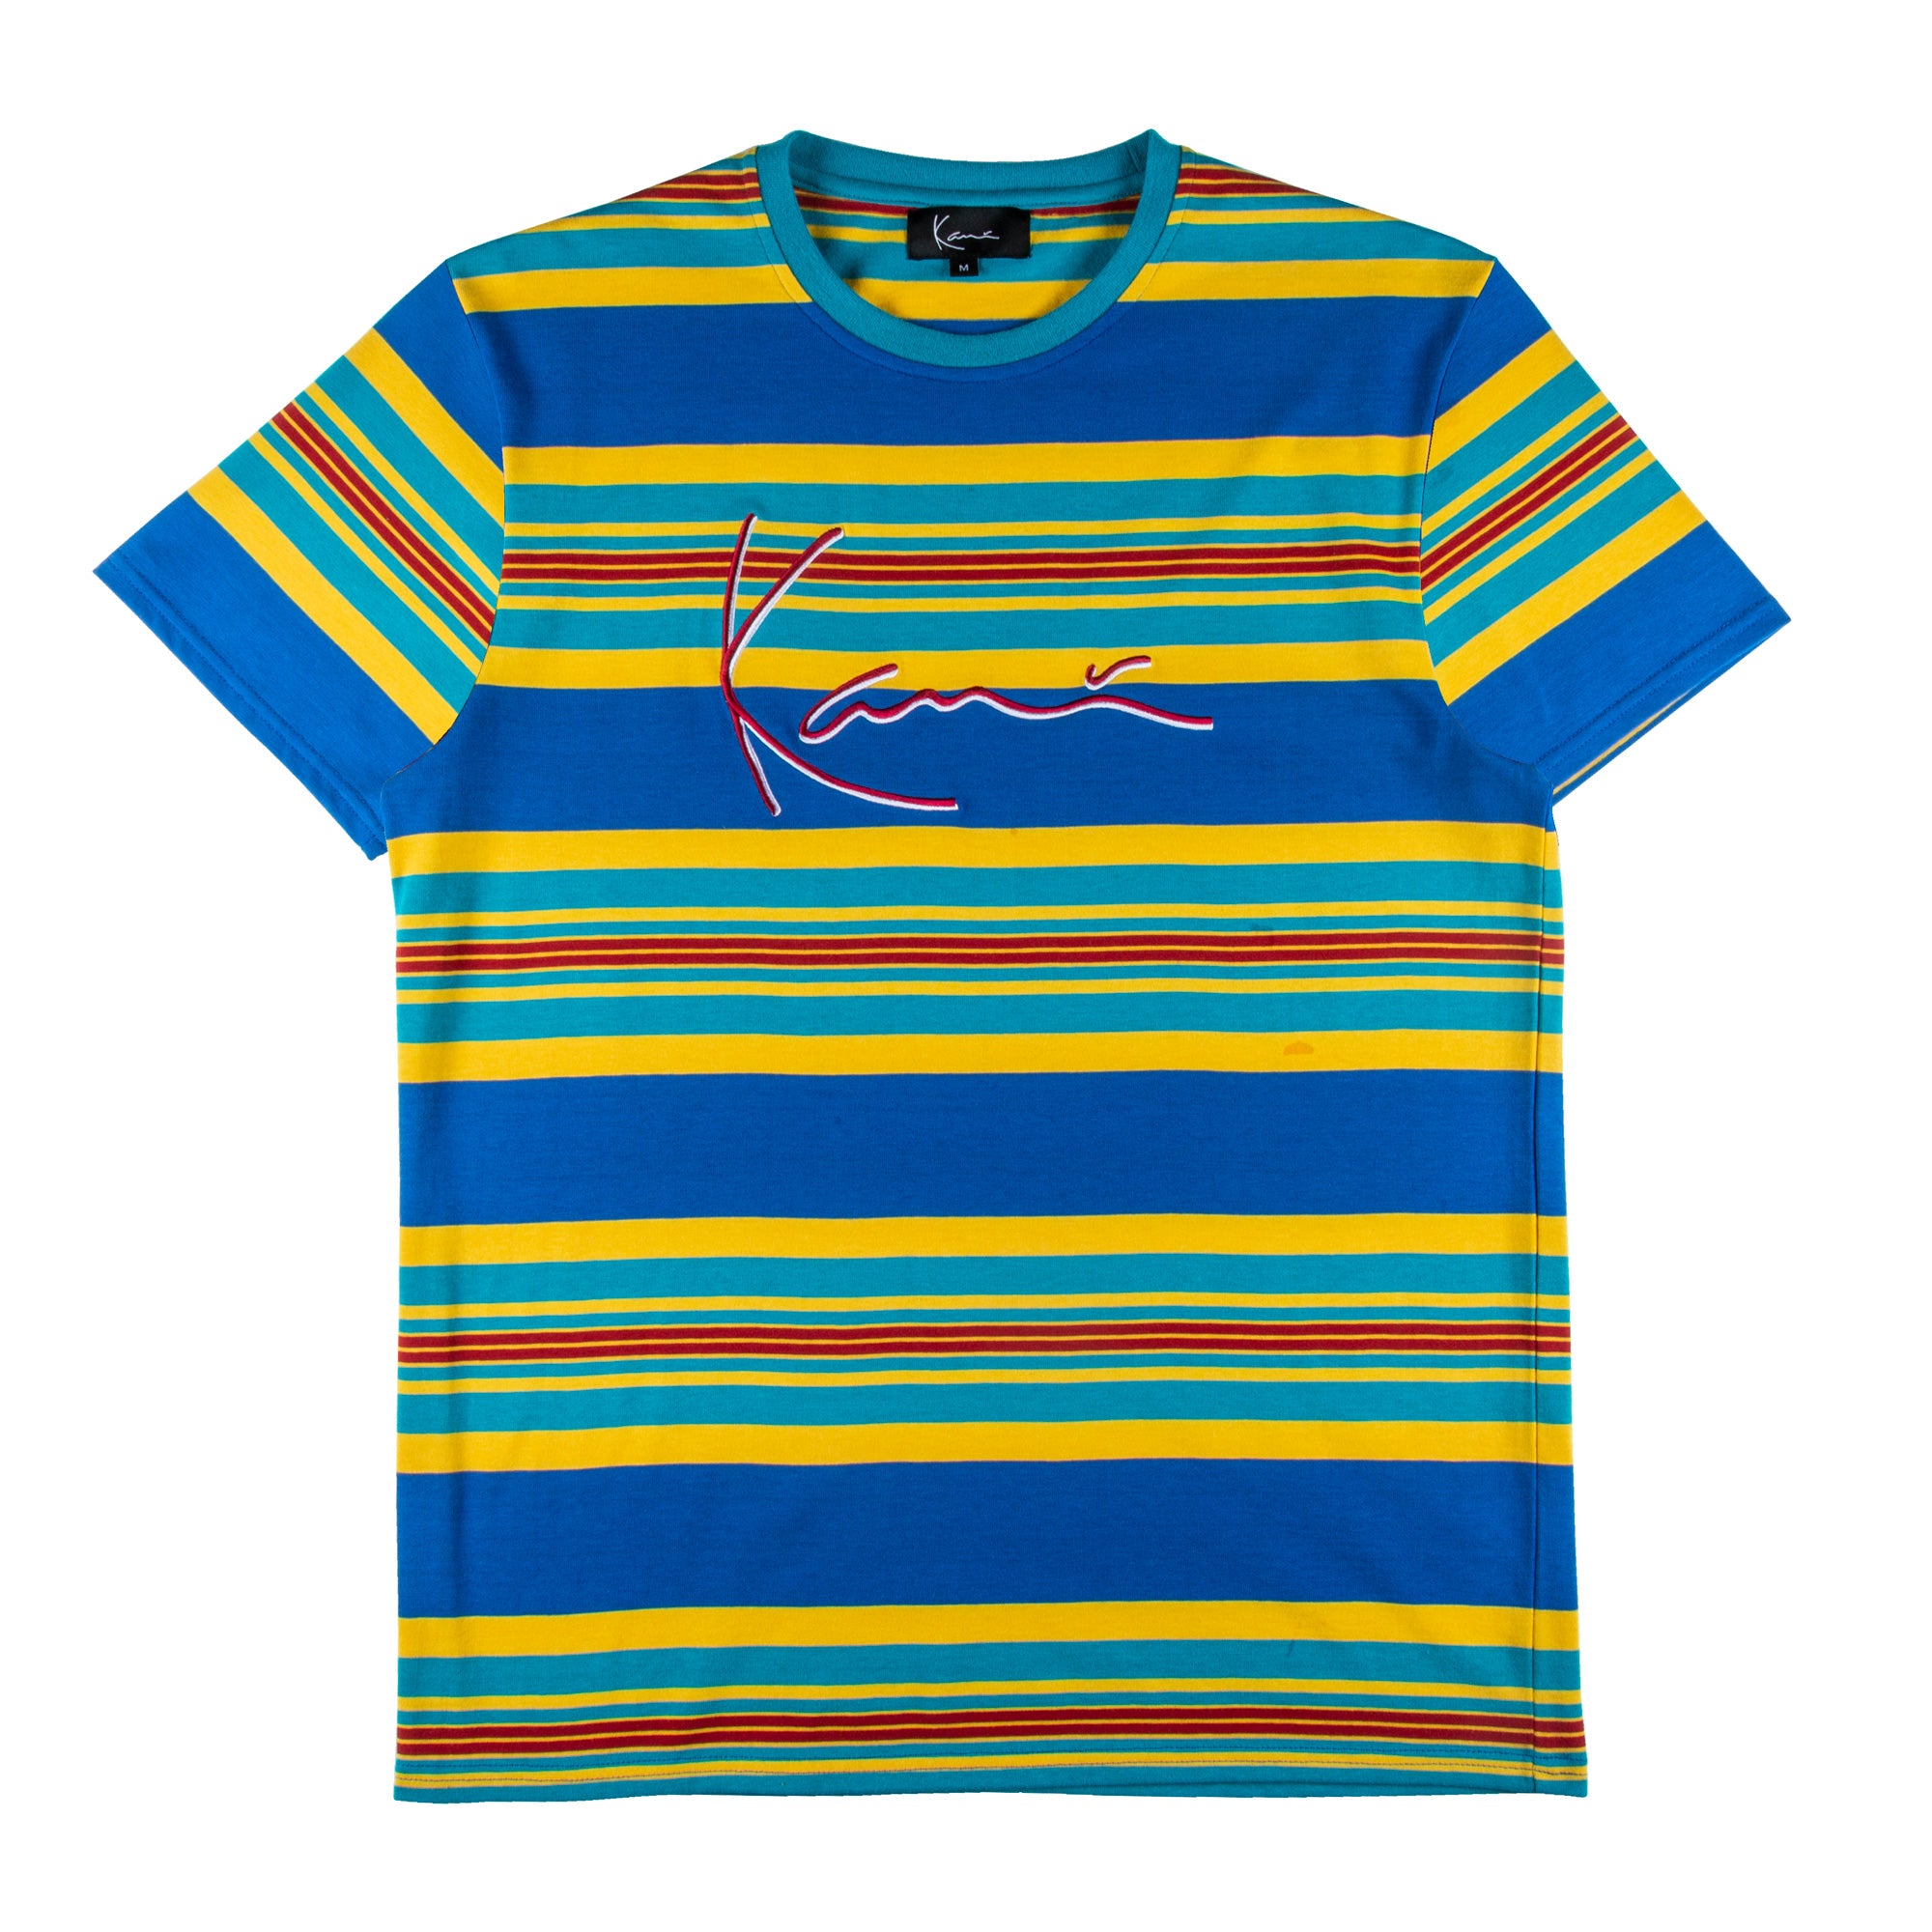 red blue and yellow striped shirt